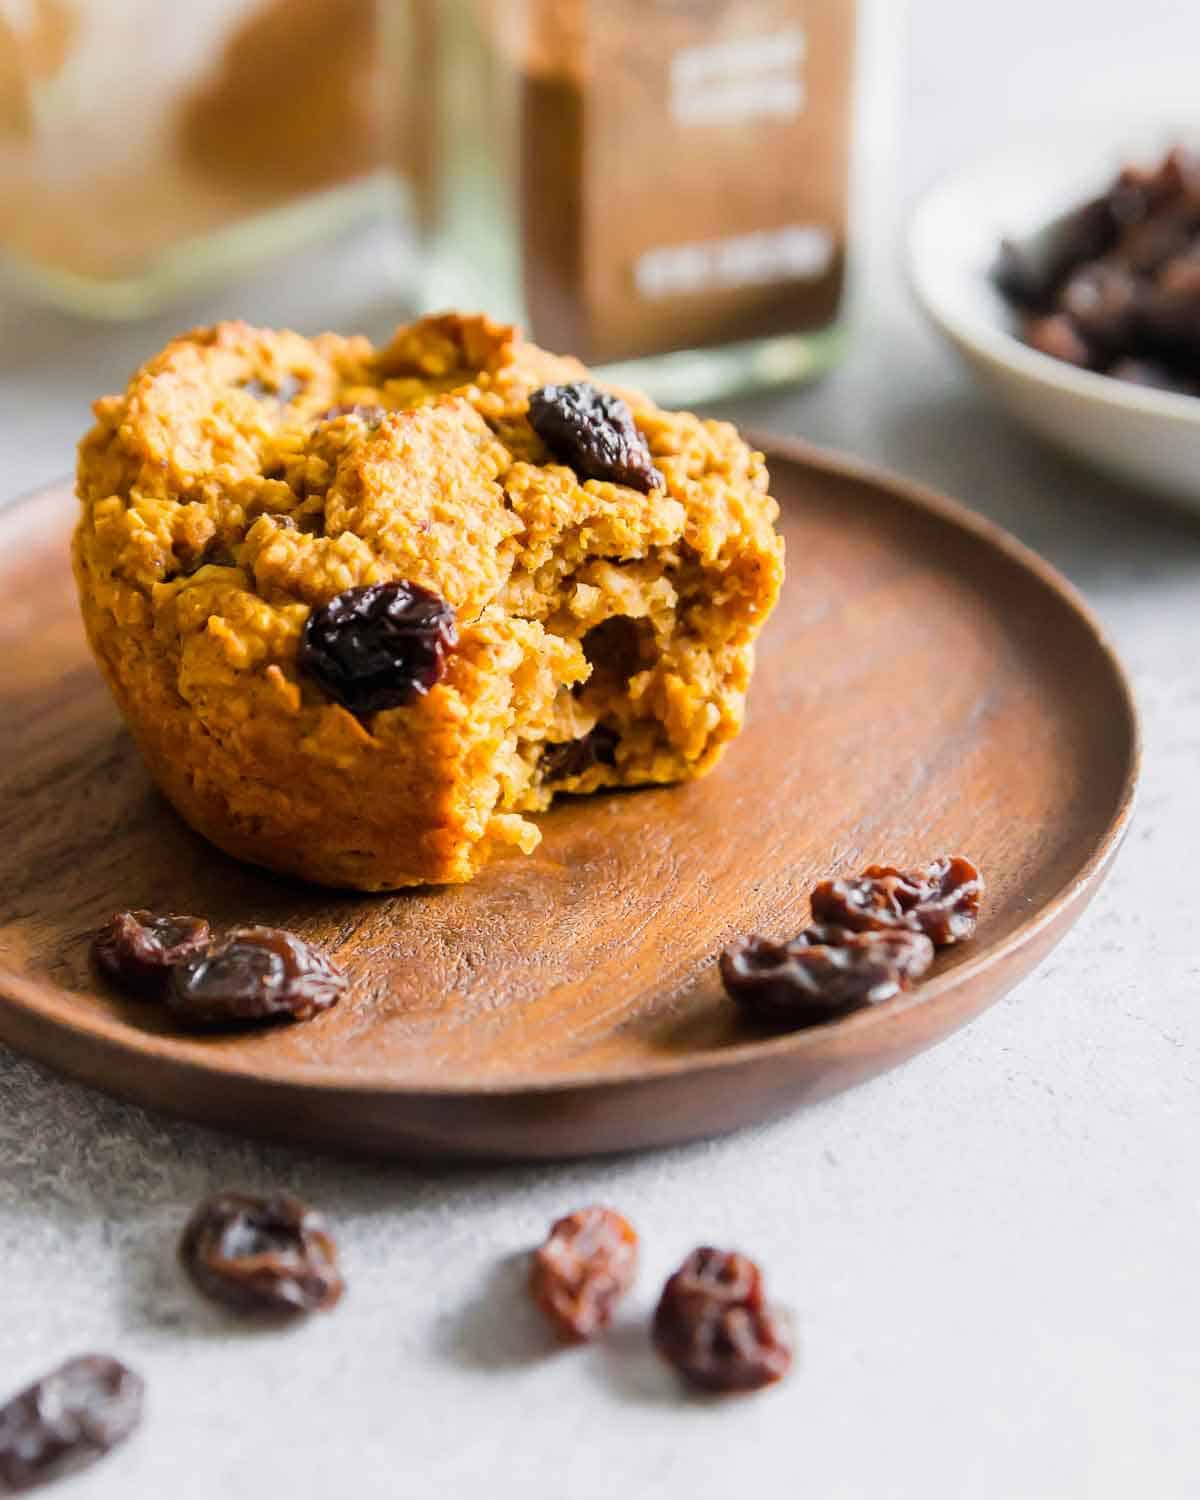 Bran muffins made with sweet potato puree and packed with raisins are a nutritious, gluten-free and vegan snack perfect for colder weather.